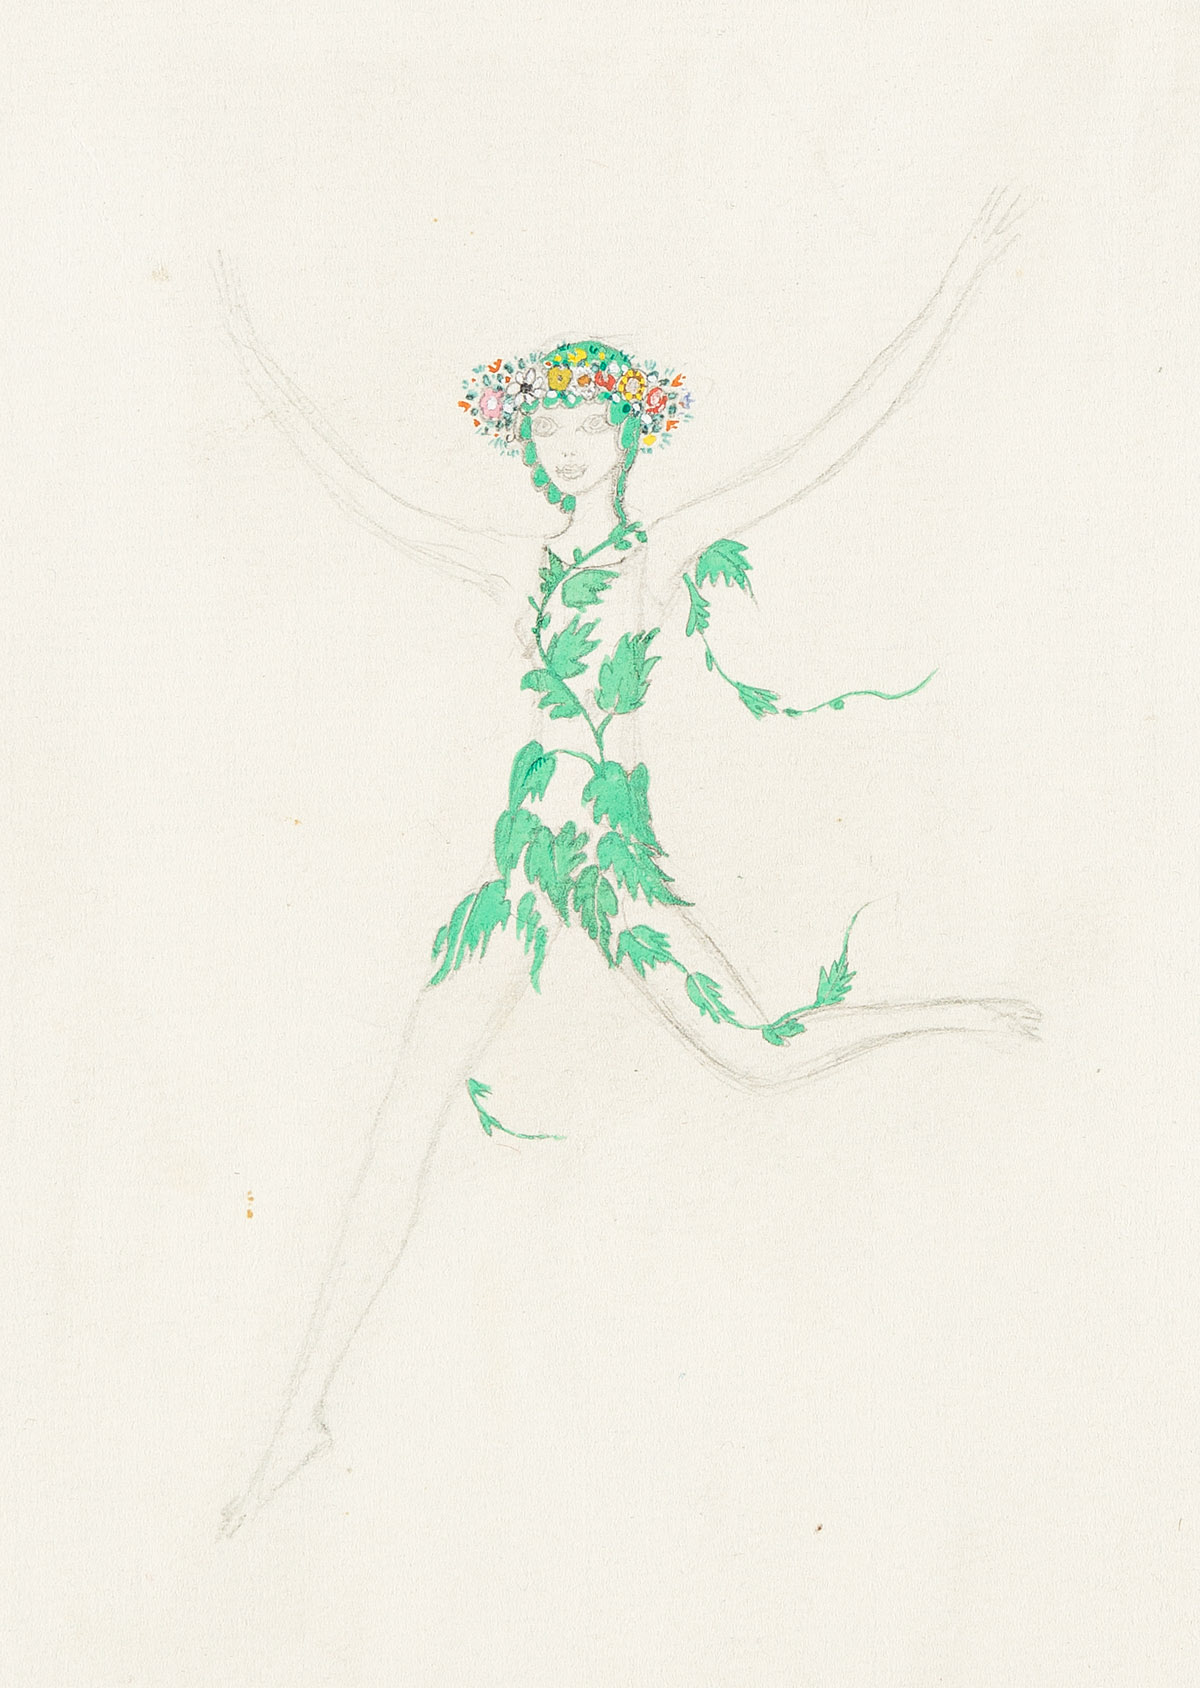 KAY NIELSEN (1886-1957) Leaping sprite.  Costume study.